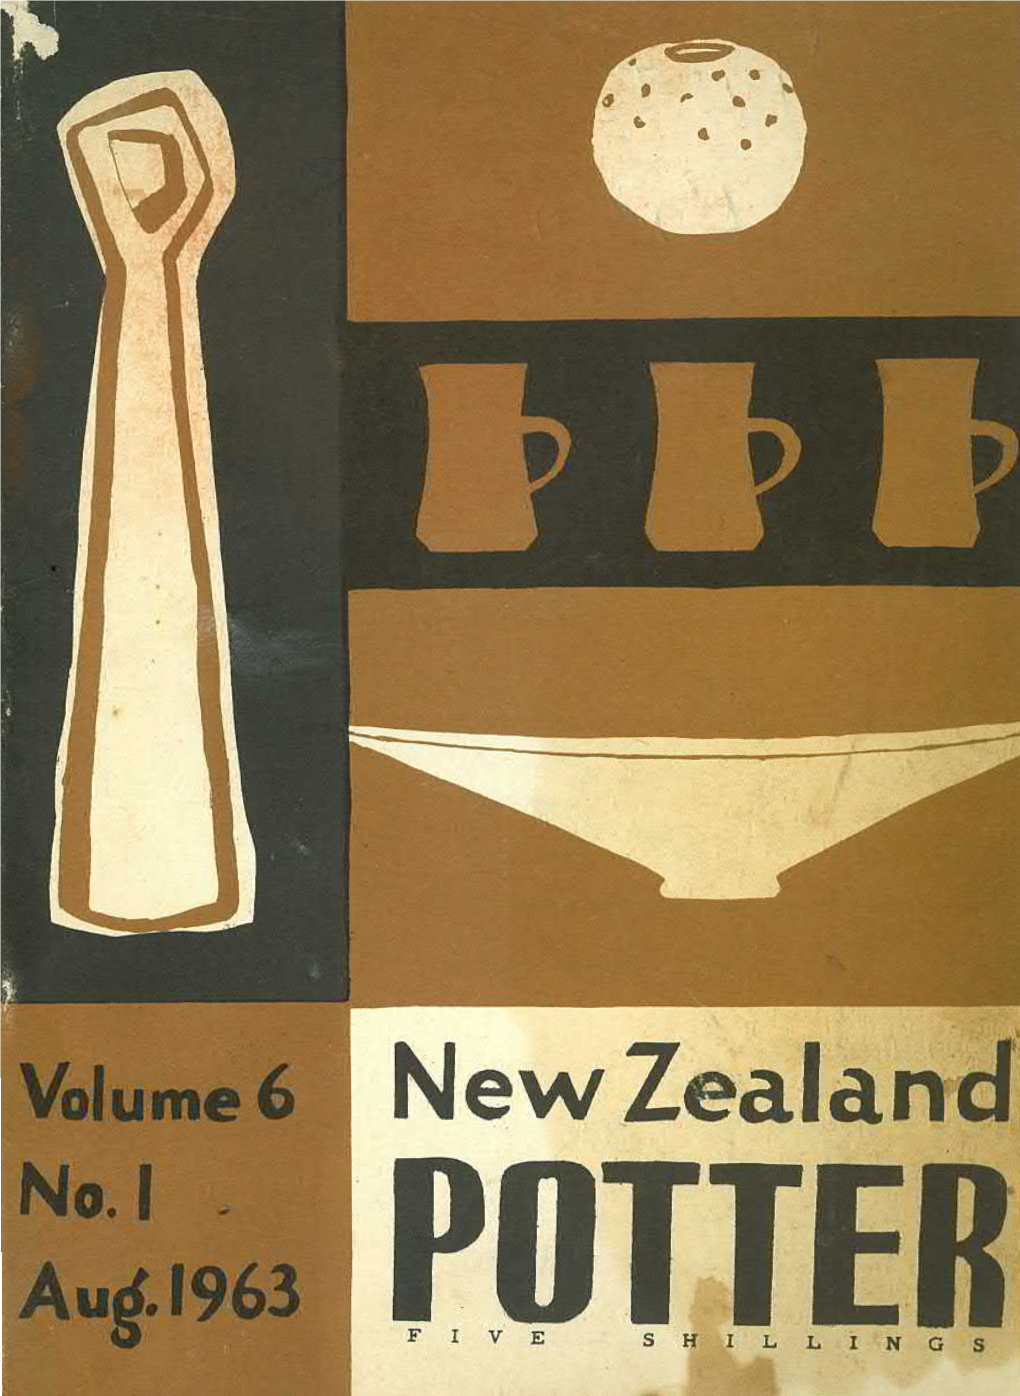 New Zealand Potter Volume 6 Number 1, August 1963